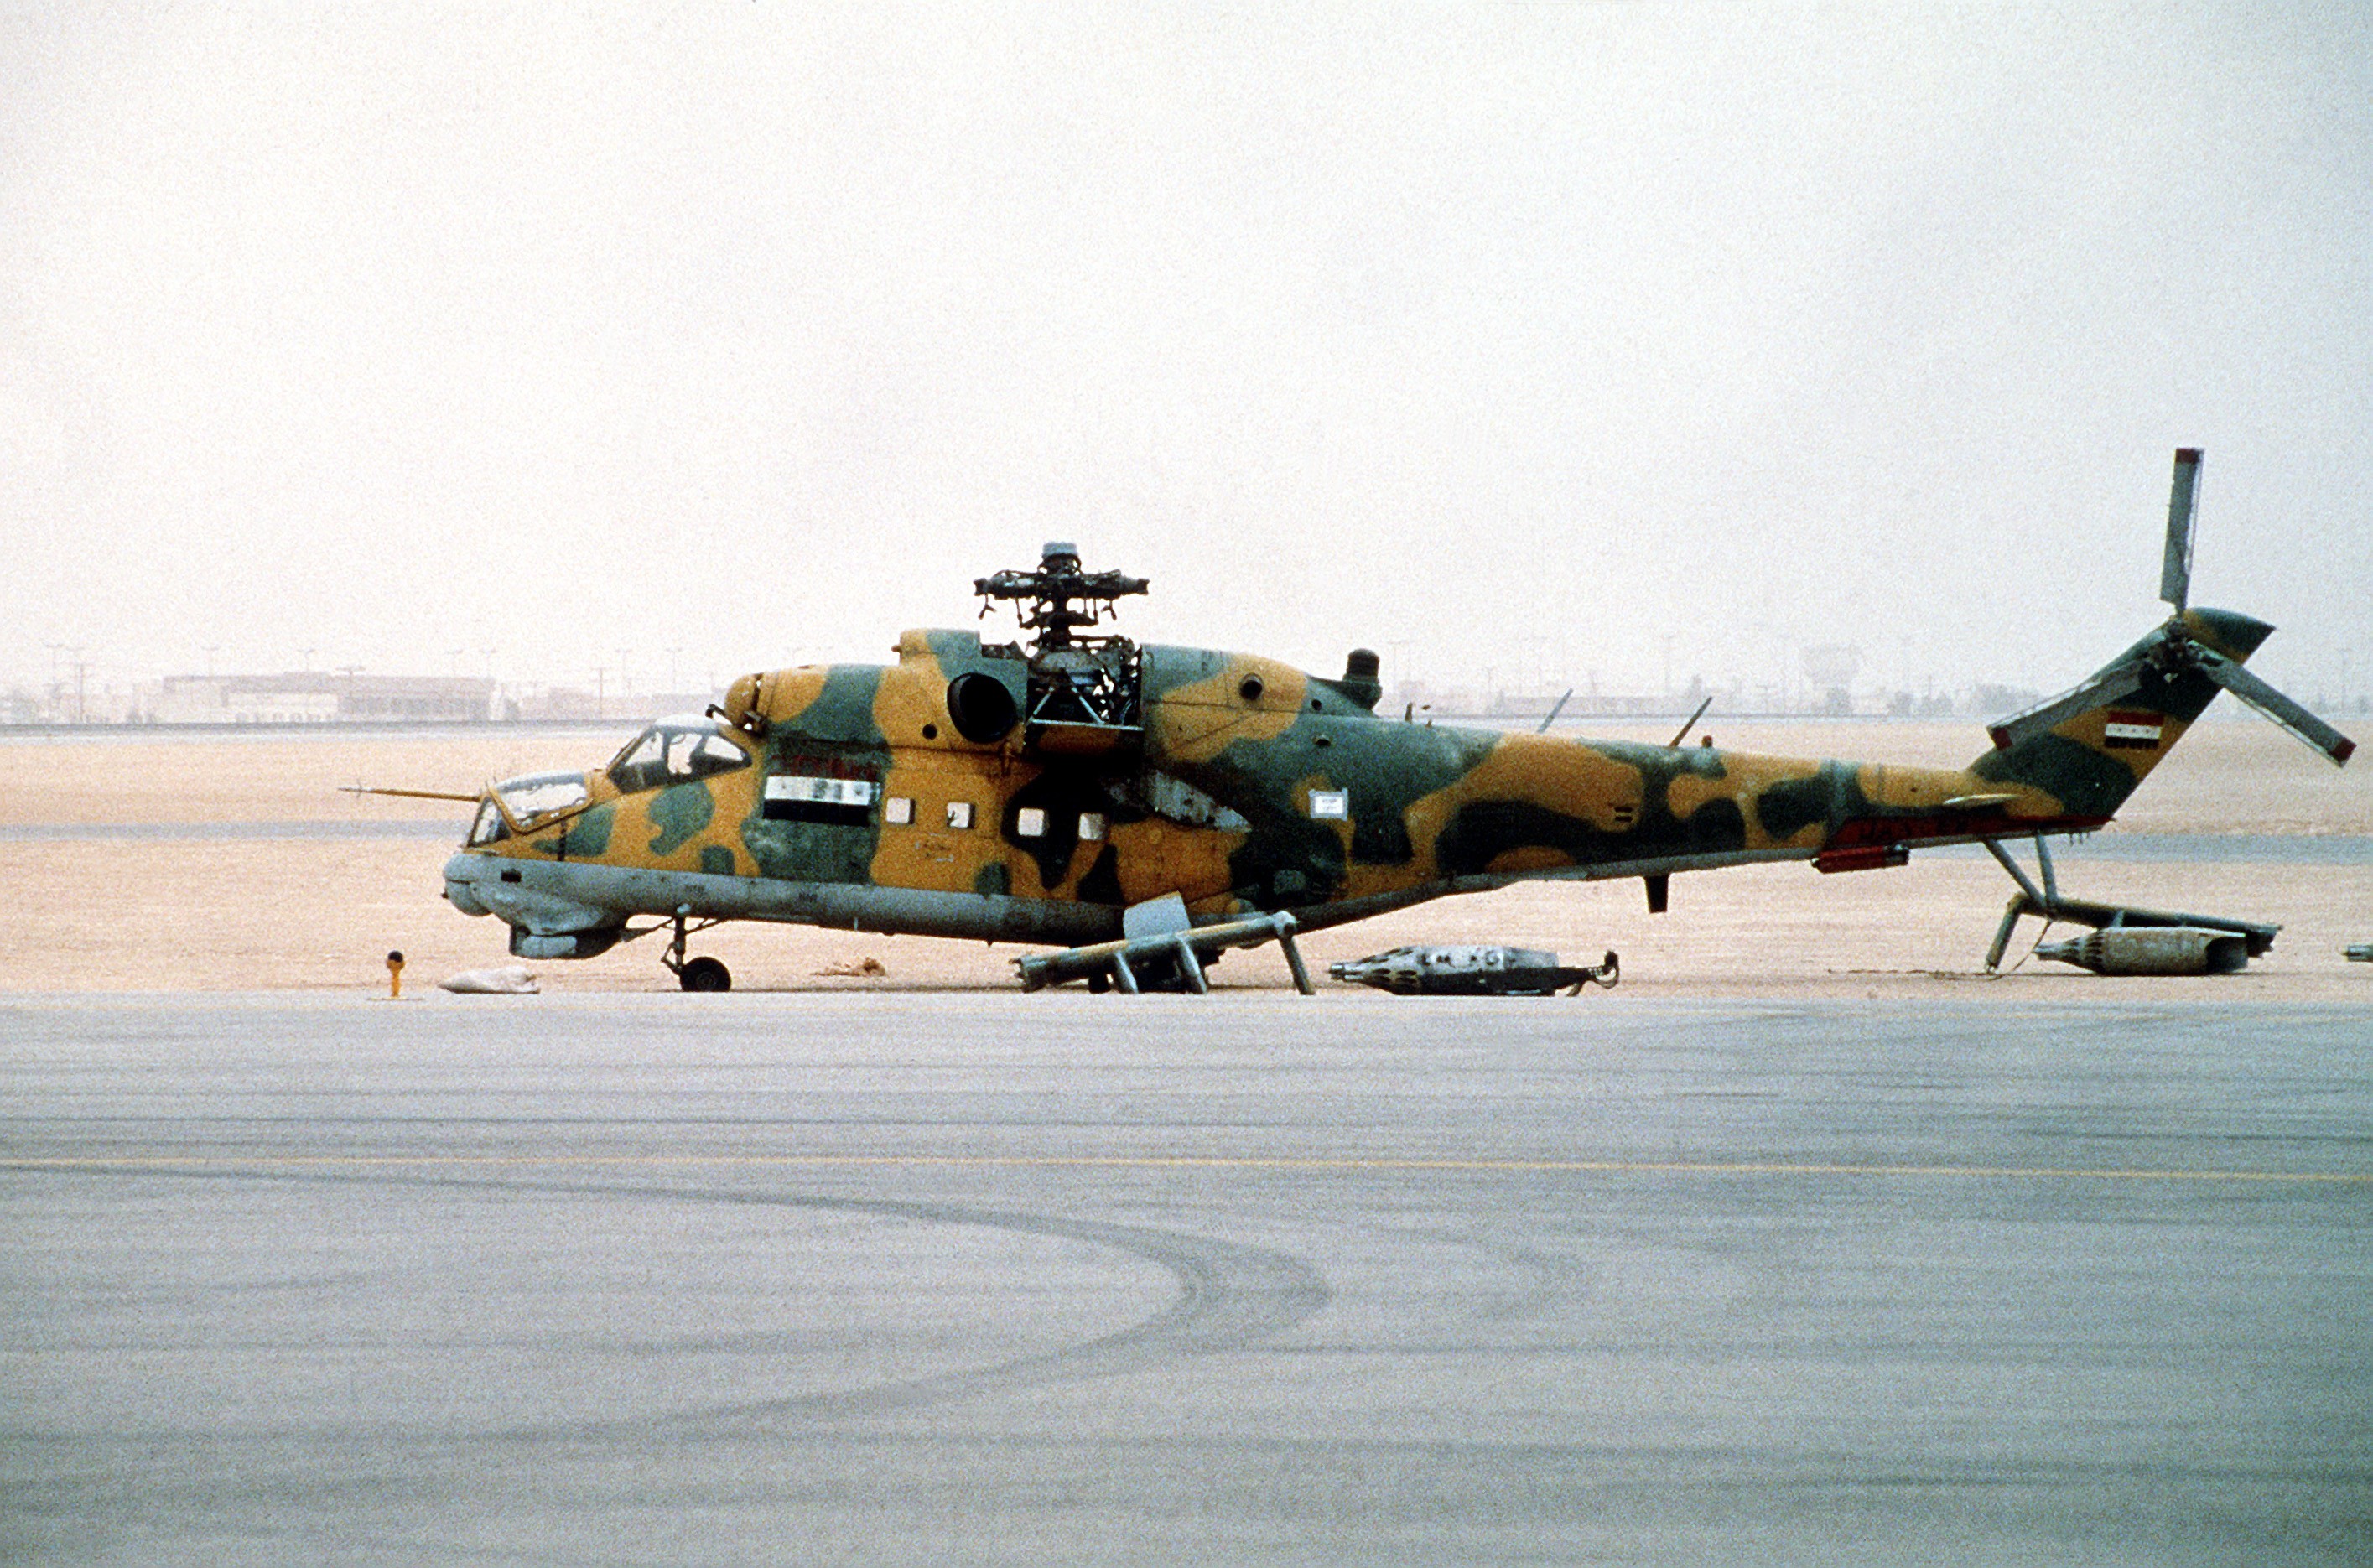 General 2830x1870 Mil Mi-24 helicopters military attack helicopters vehicle military vehicle aircraft military aircraft Operation Desert Storm 1991 (Year) Mil Helicopters Russian/Soviet aircraft